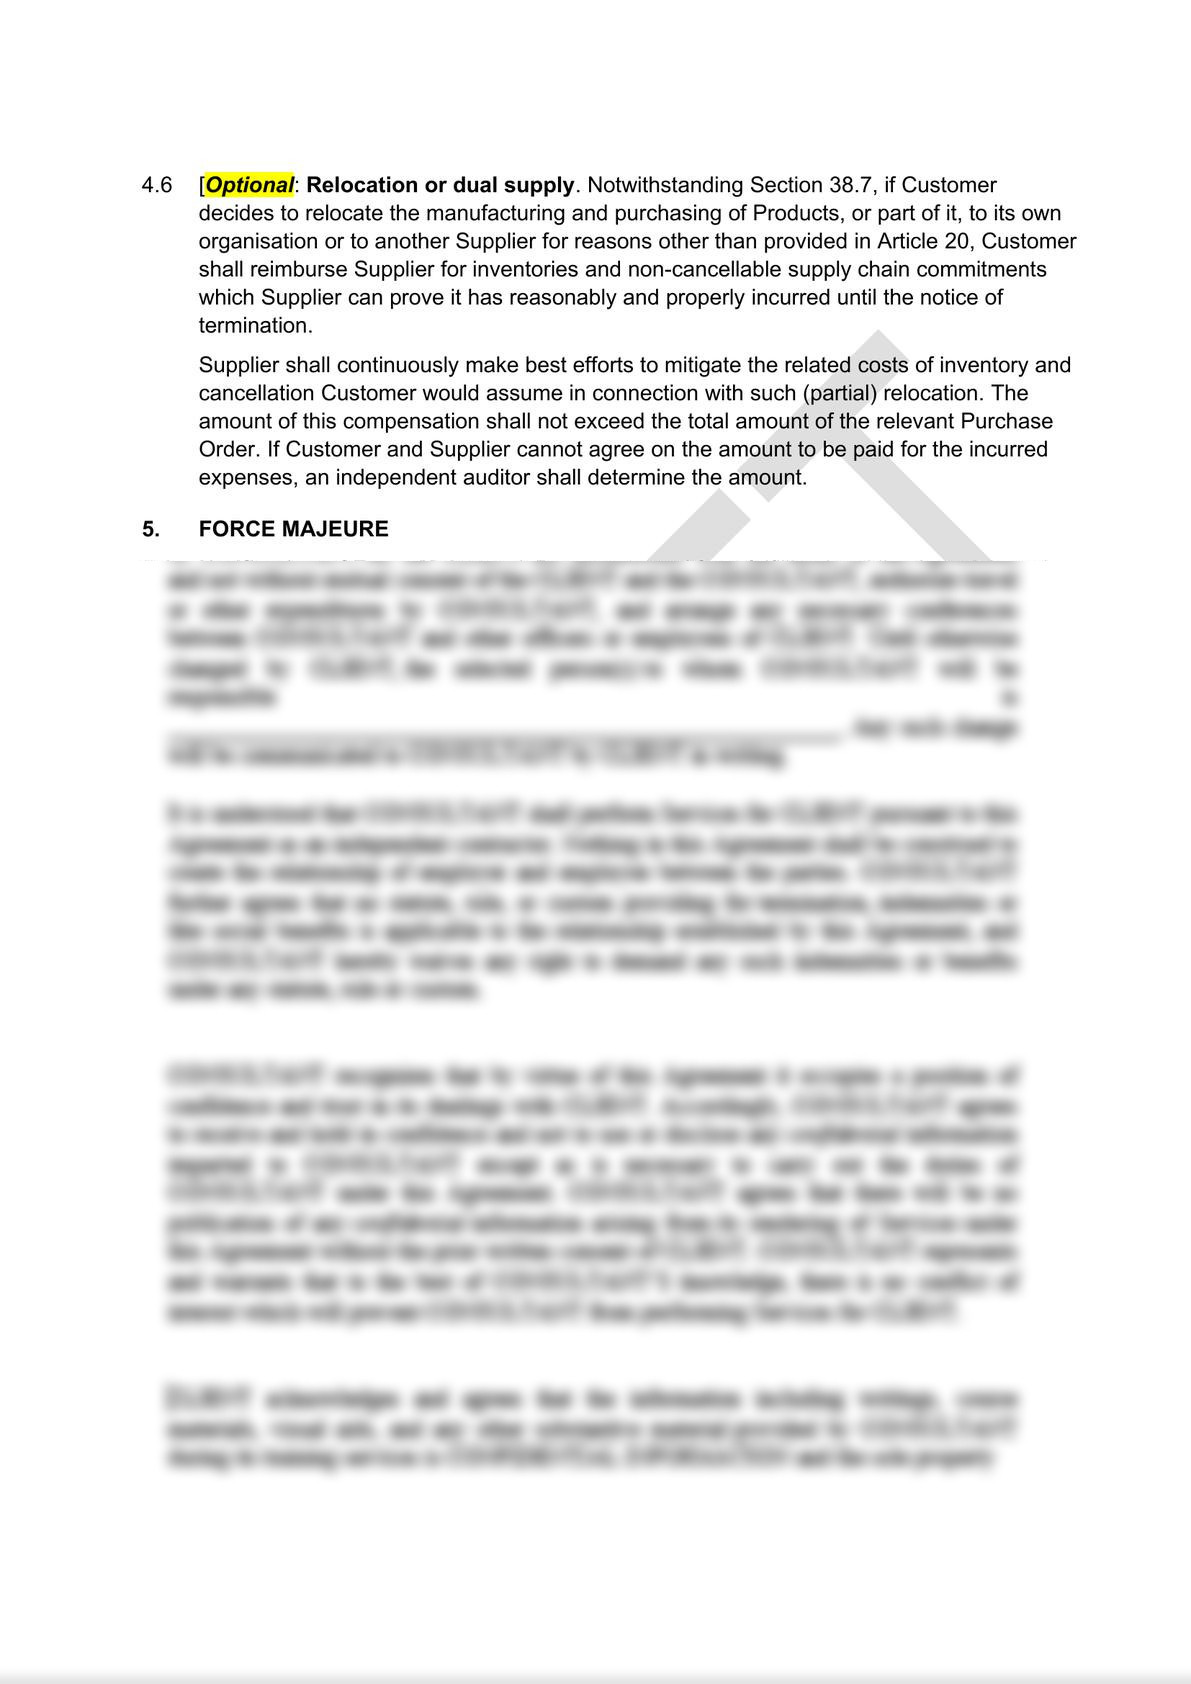 General Purchasing Agreement-9